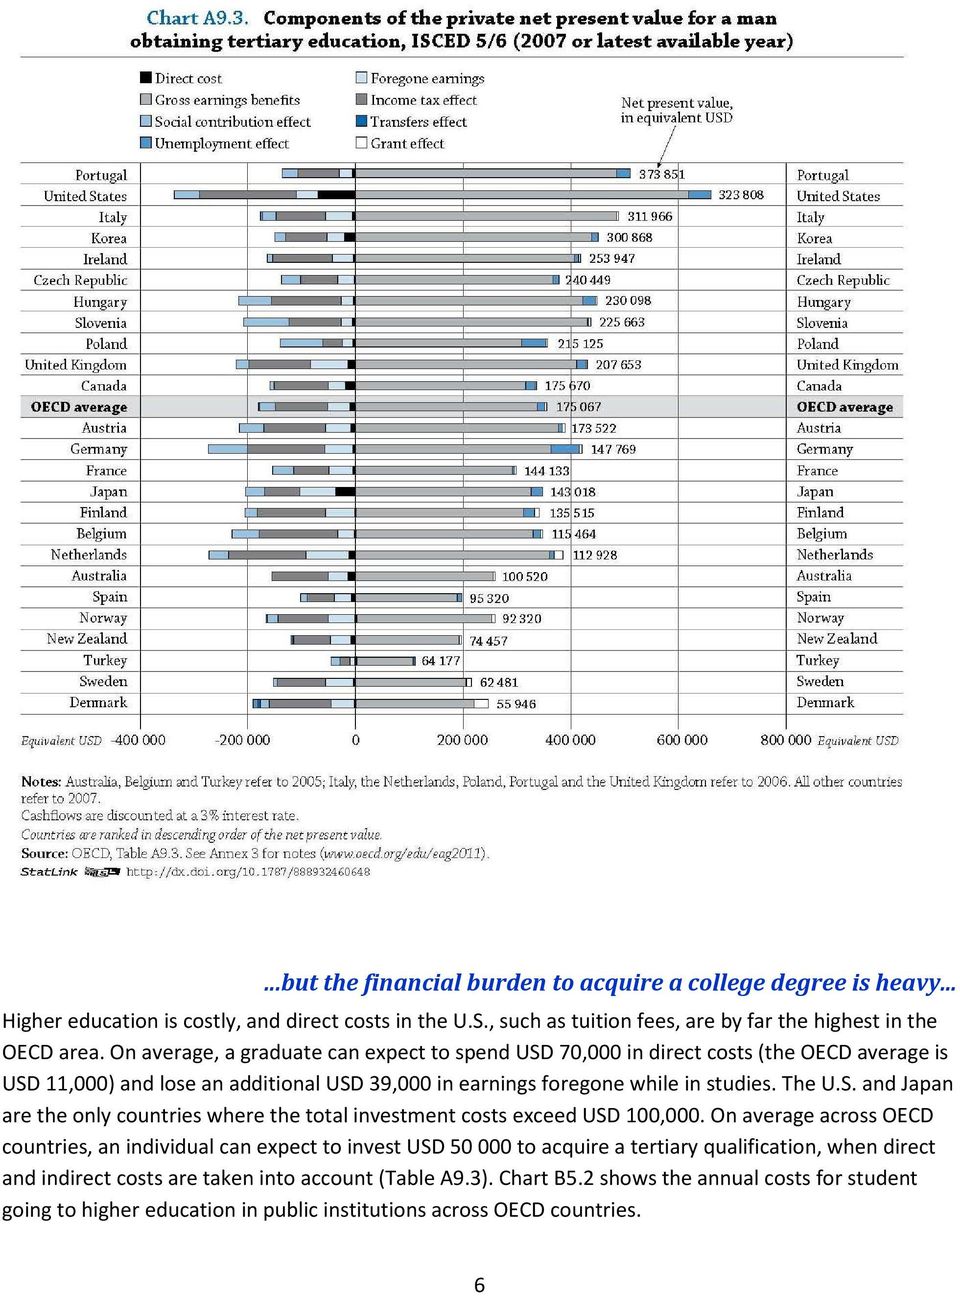 On average across OECD countries, an individual can expect to invest USD 50 000 to acquire a tertiary qualification, when direct and indirect costs are taken into account (Table A9.3).